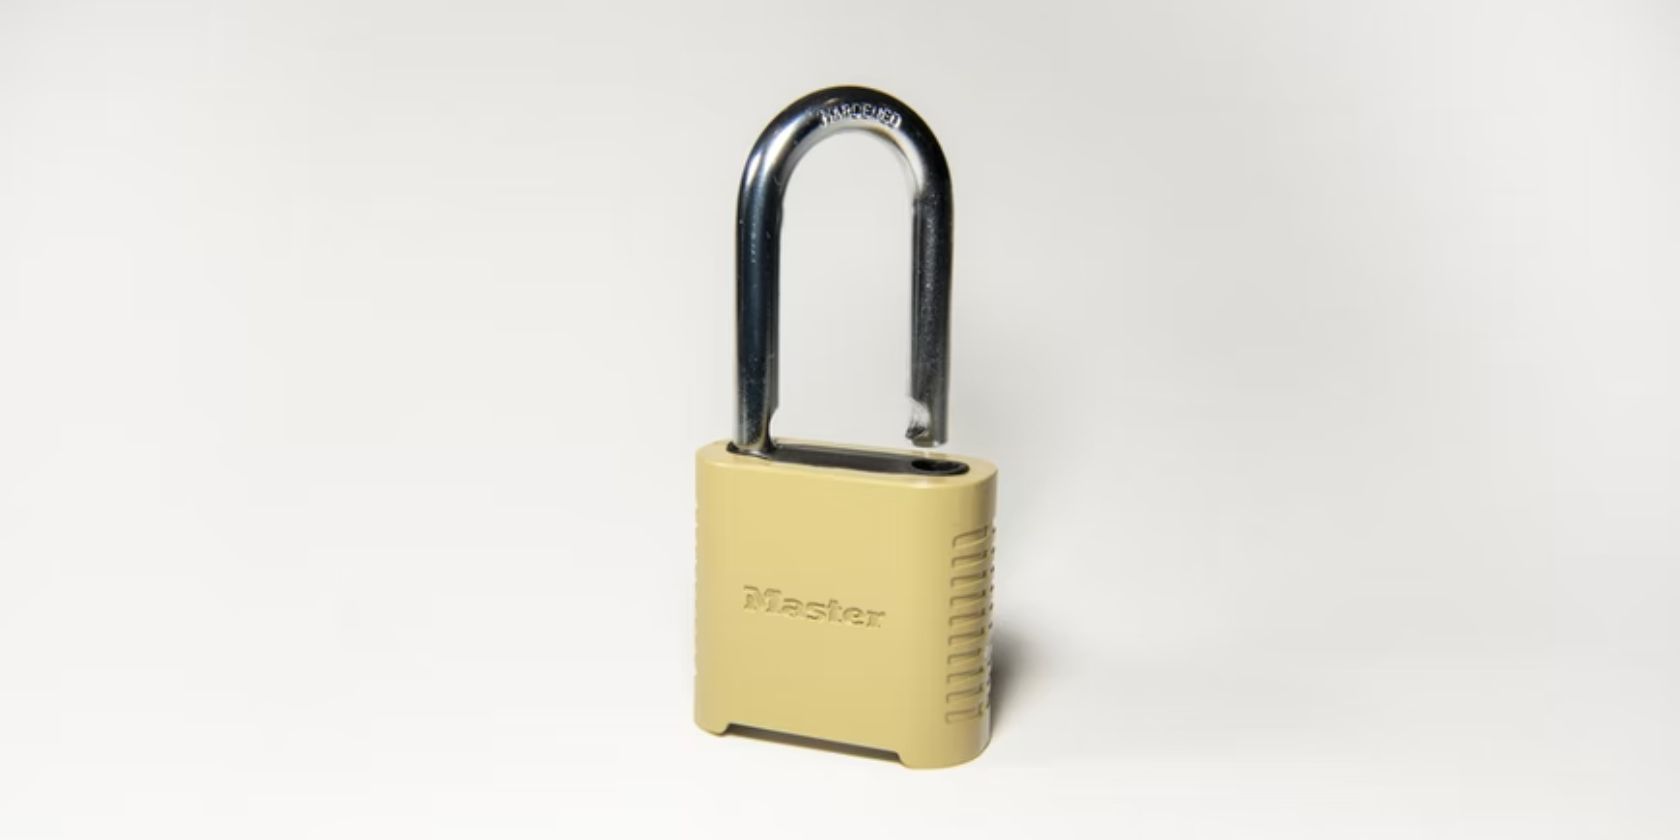 pale yellow padlock against white background